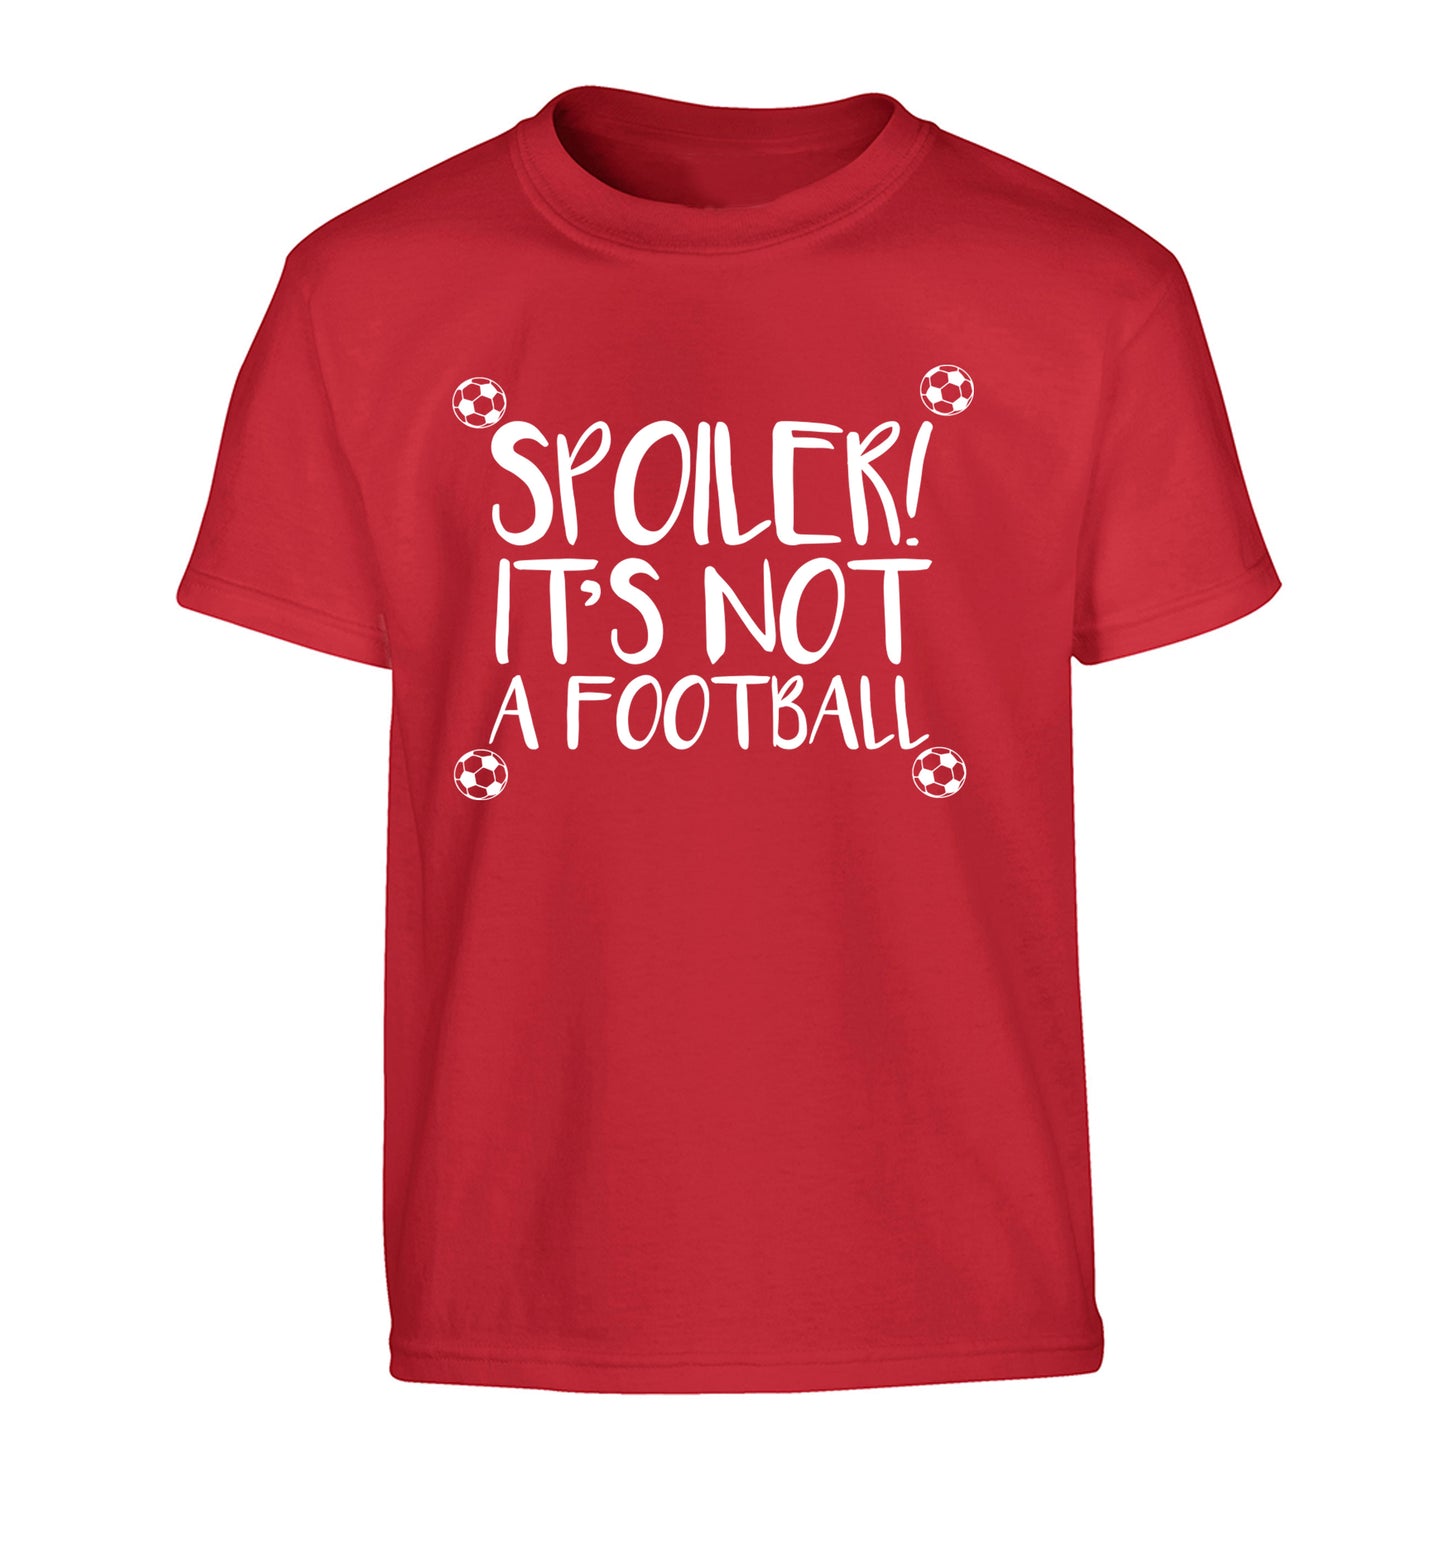 Spoiler it's not a football Children's red Tshirt 12-13 Years